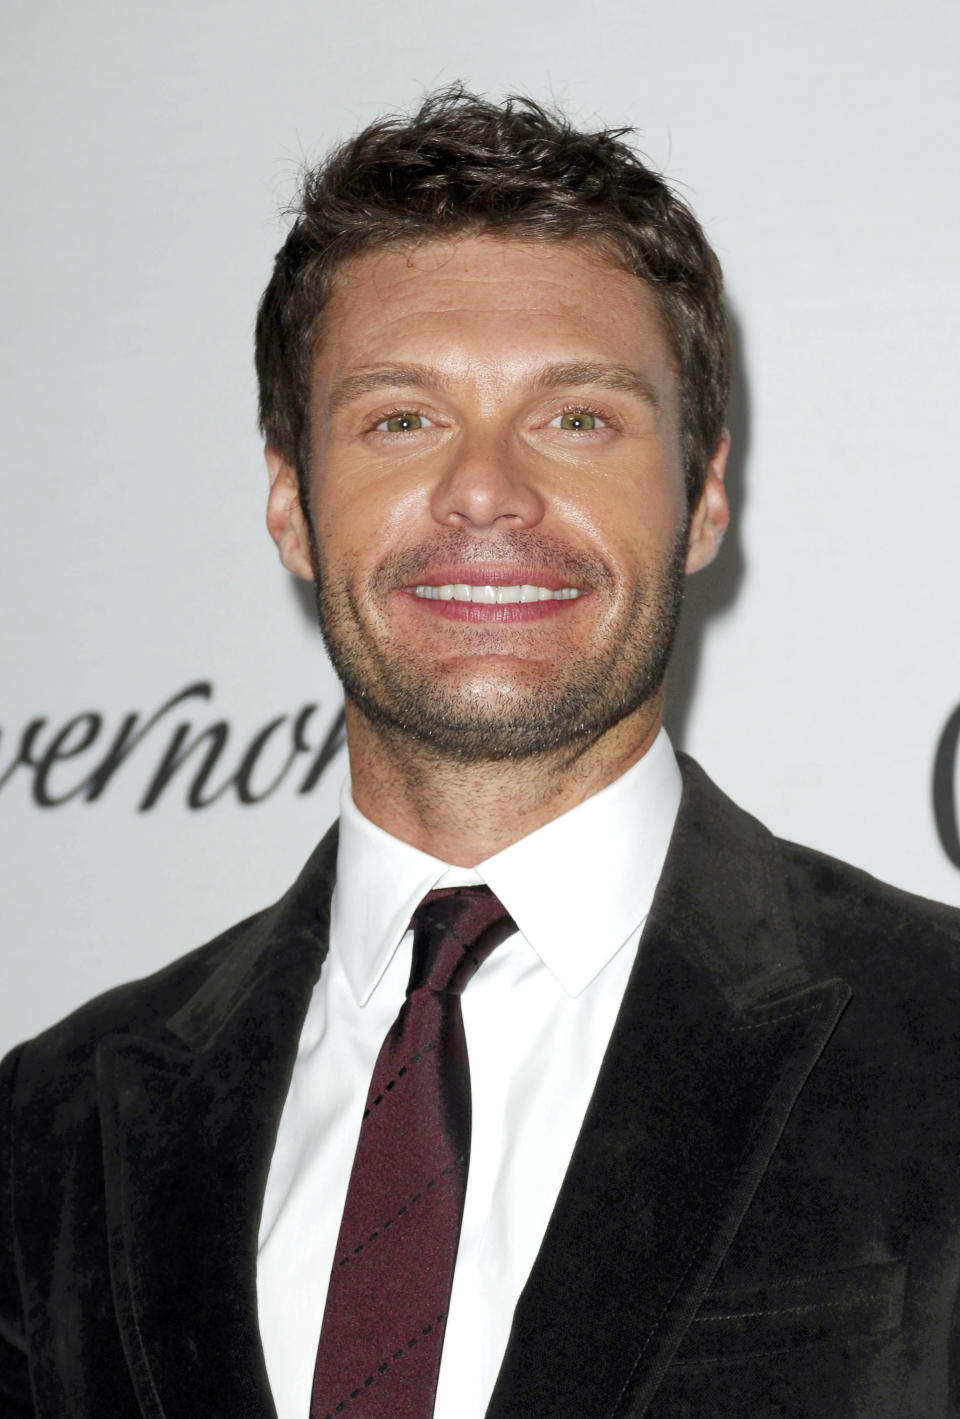 Plastic Surgery? Botox? See Ryan Seacrest’s Transformation From ...